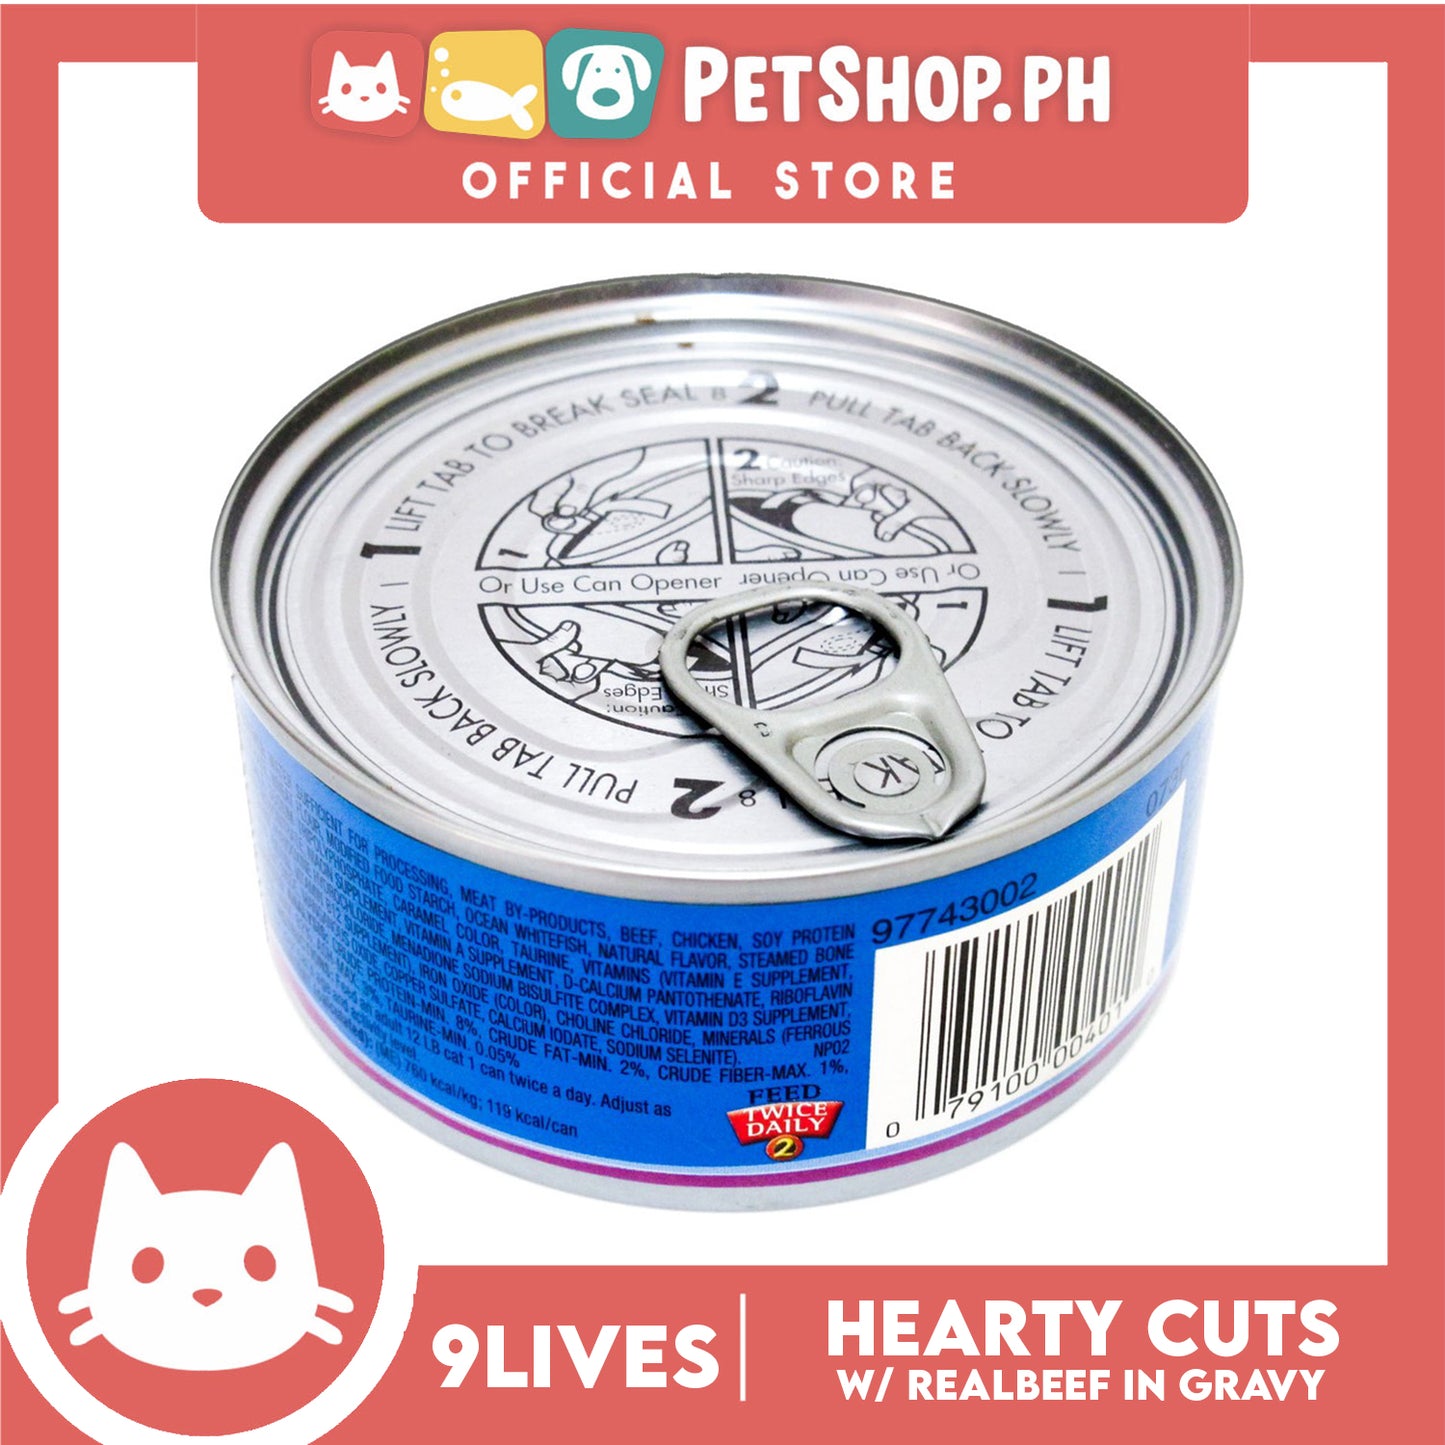 9Lives Hearty Cuts with Real Beef in Gravy 156g Cat Wet Food